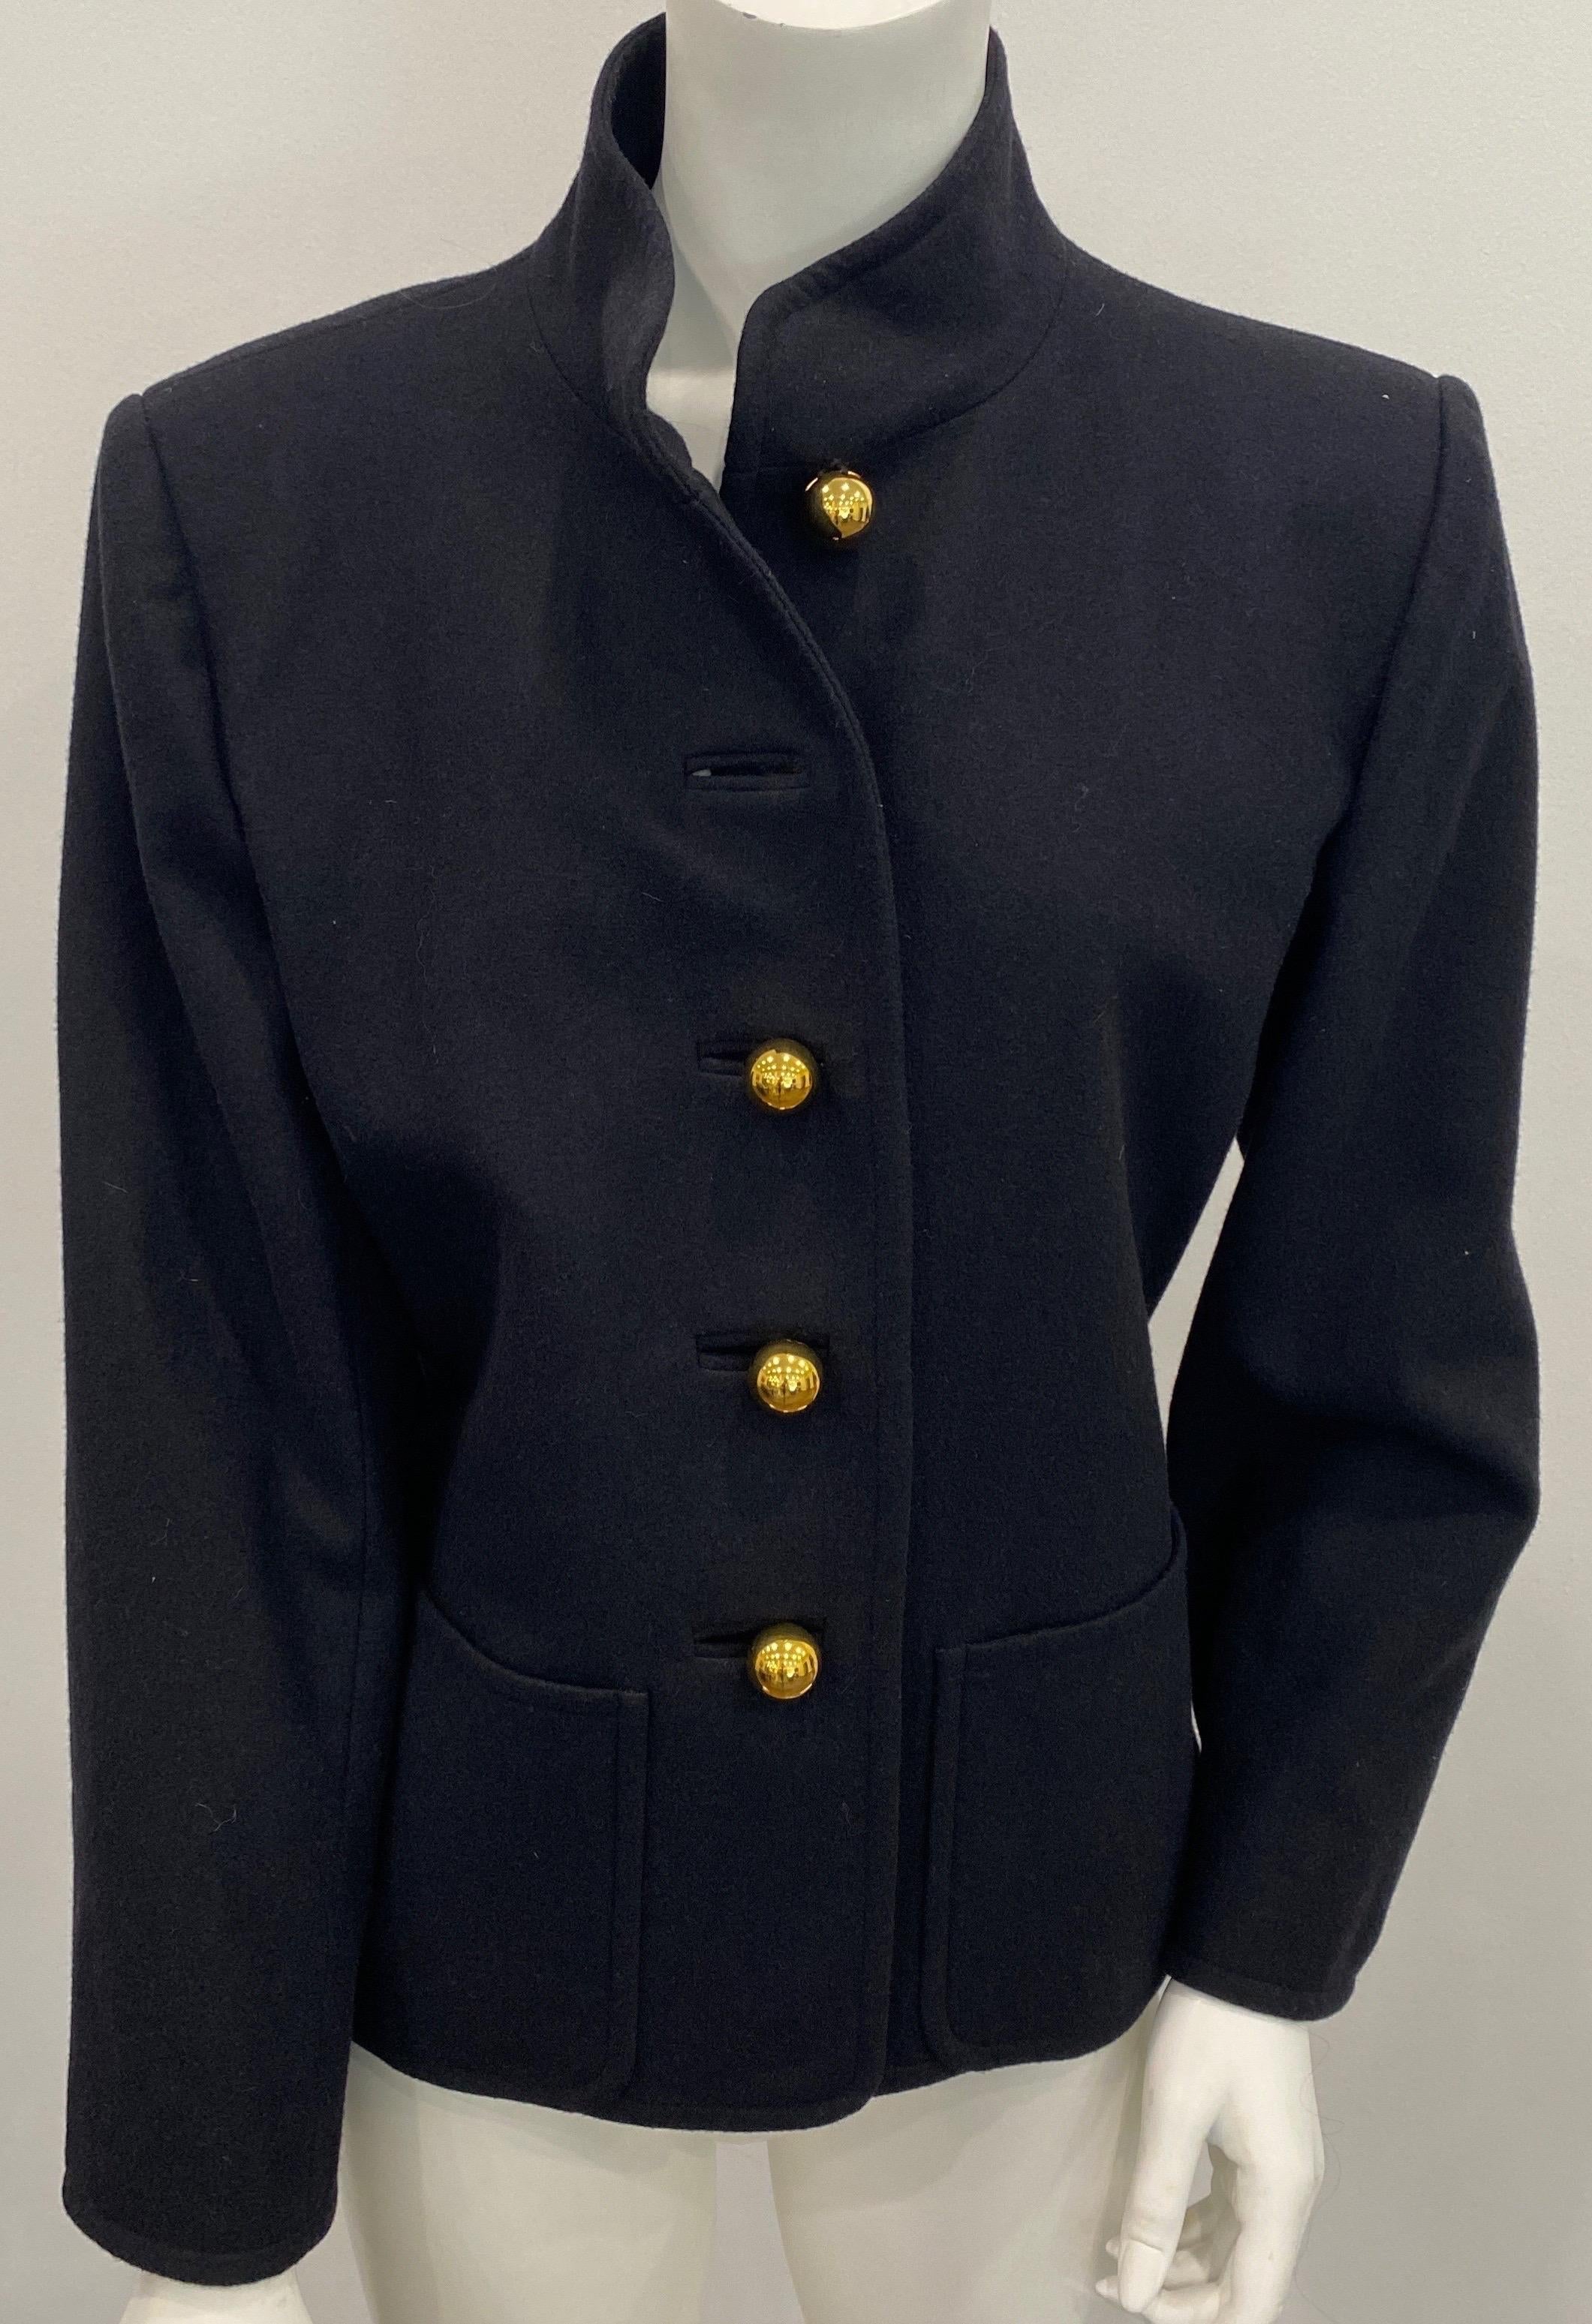 Yves Saint Laurent 1970's Black Soft Double-Faced Wool Jacket - Size 44 For Sale 6